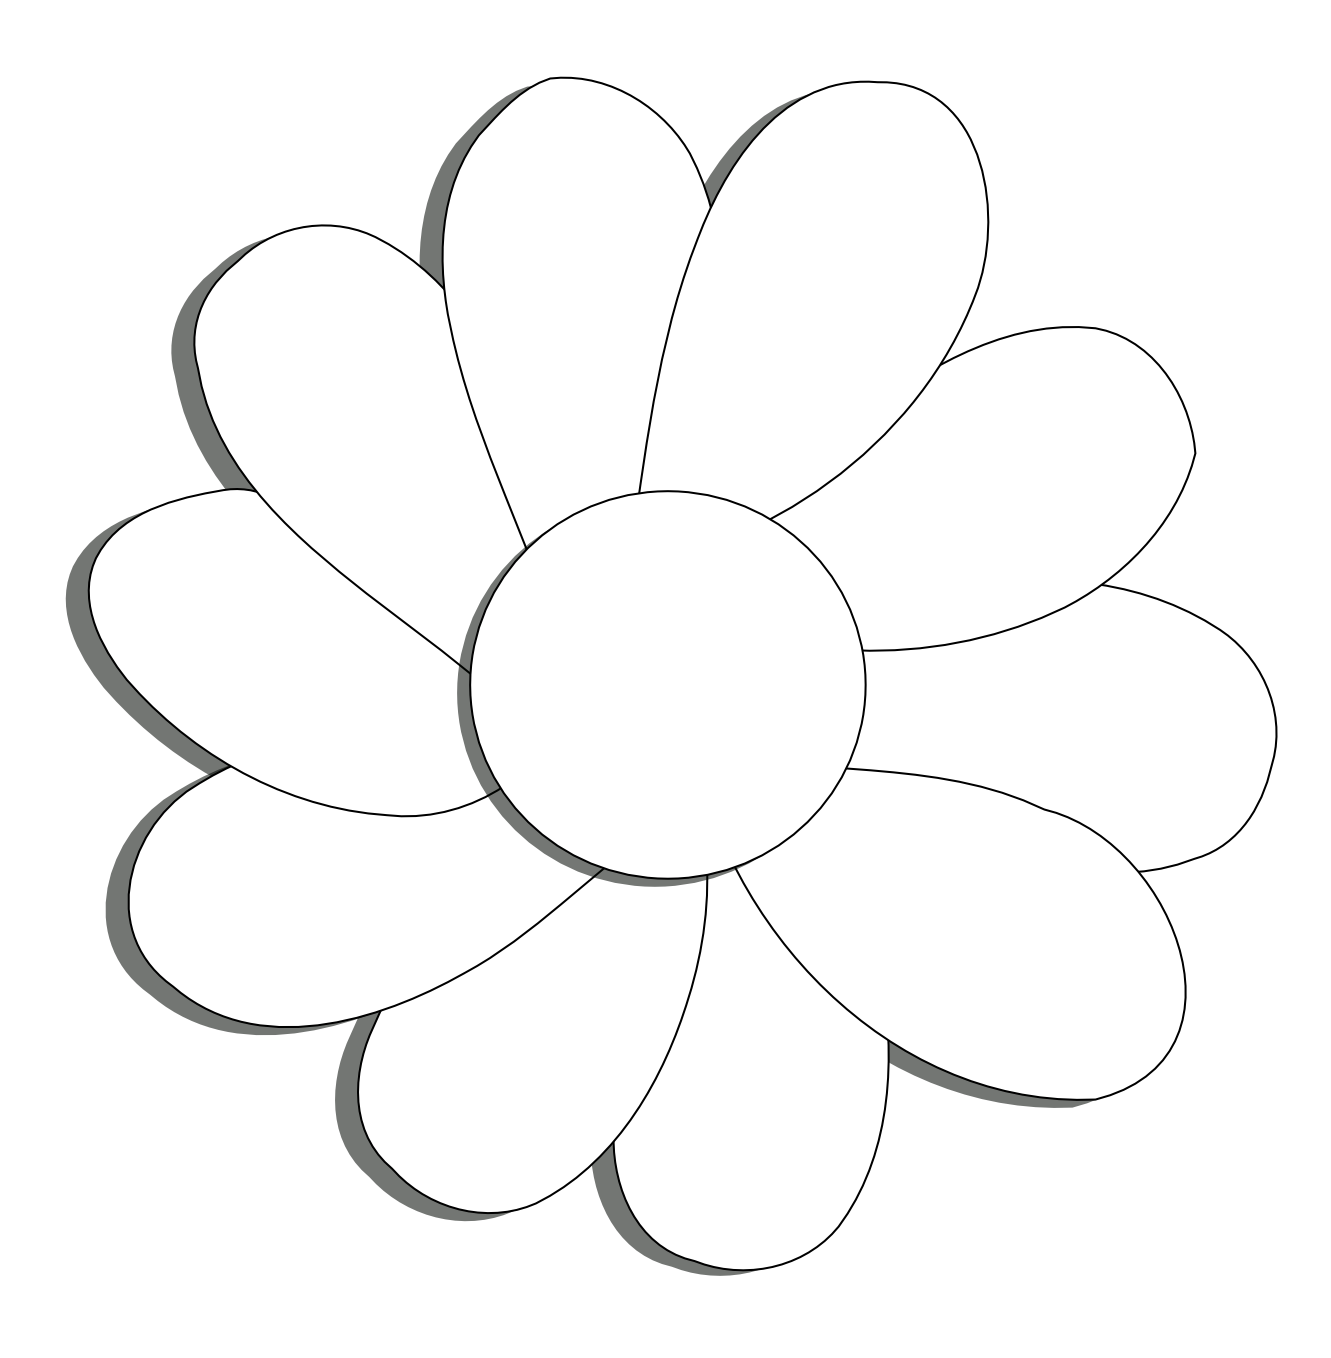 Free Black And White Flower Outline Download Free Black And White